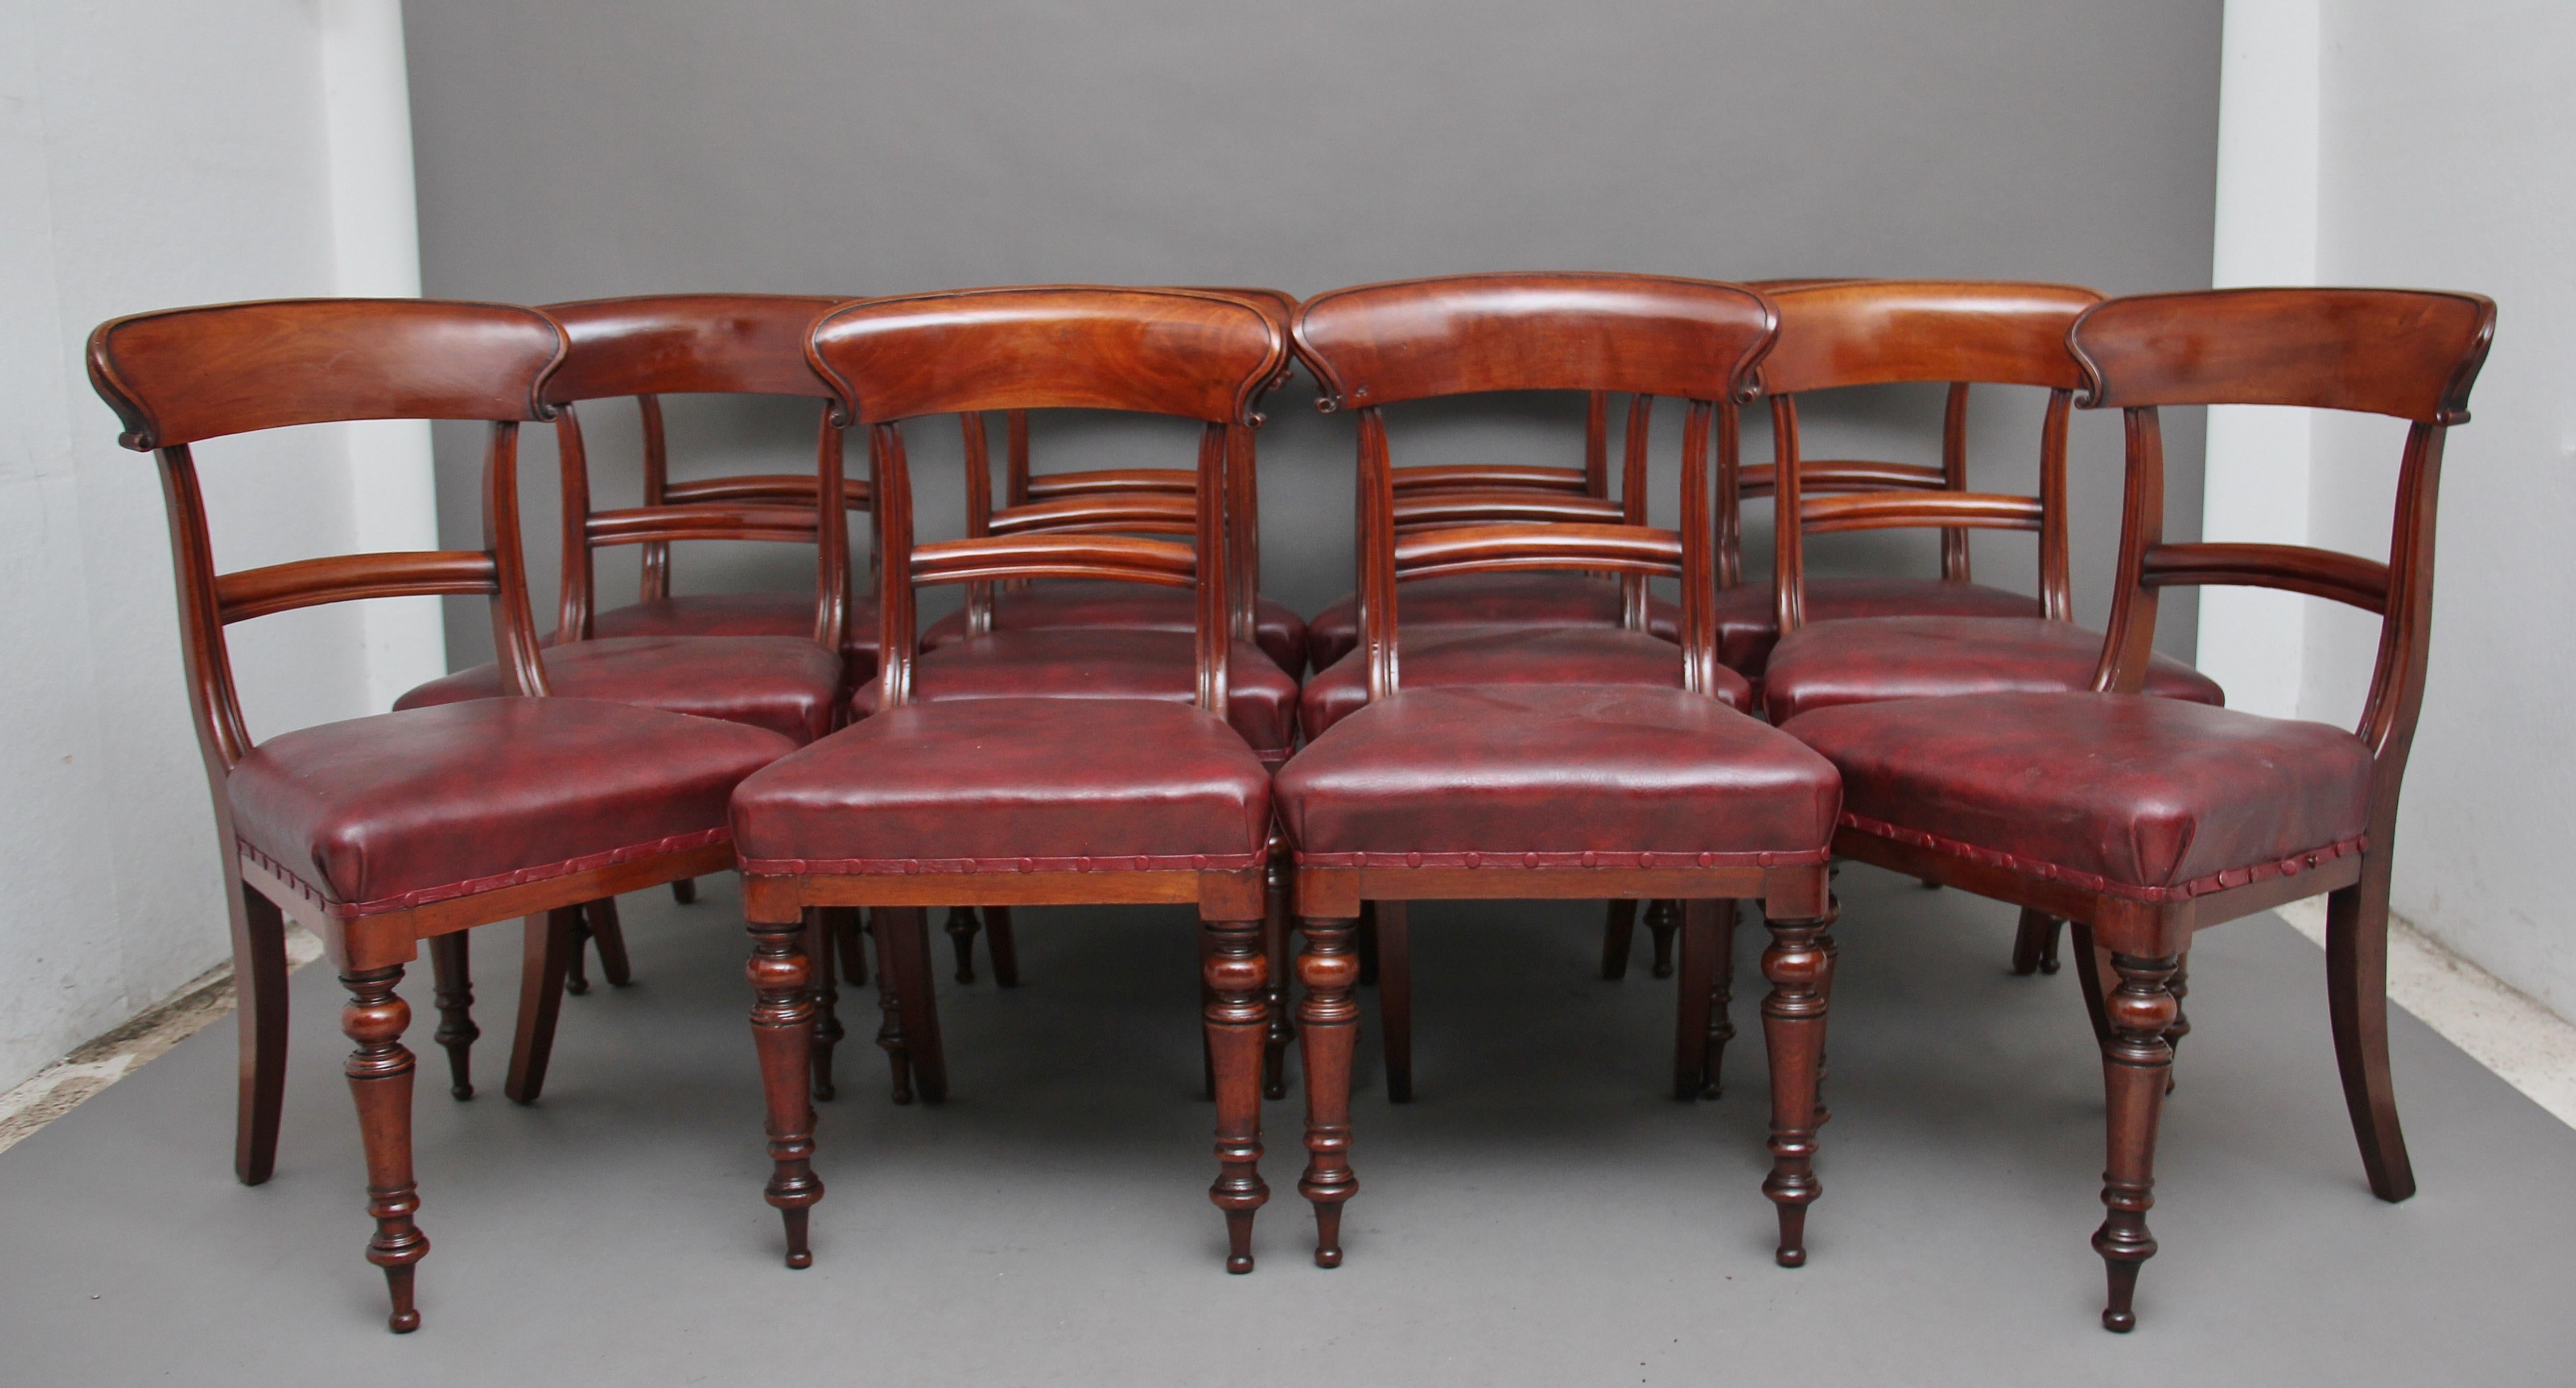 A set of twelve early Victorian mahogany dining chairs, having a curved top and central rail, the top rail having nice carved decoration, maroon stuffover upholstered seat, supported on elegant turned front legs and swept back rear legs. The set are